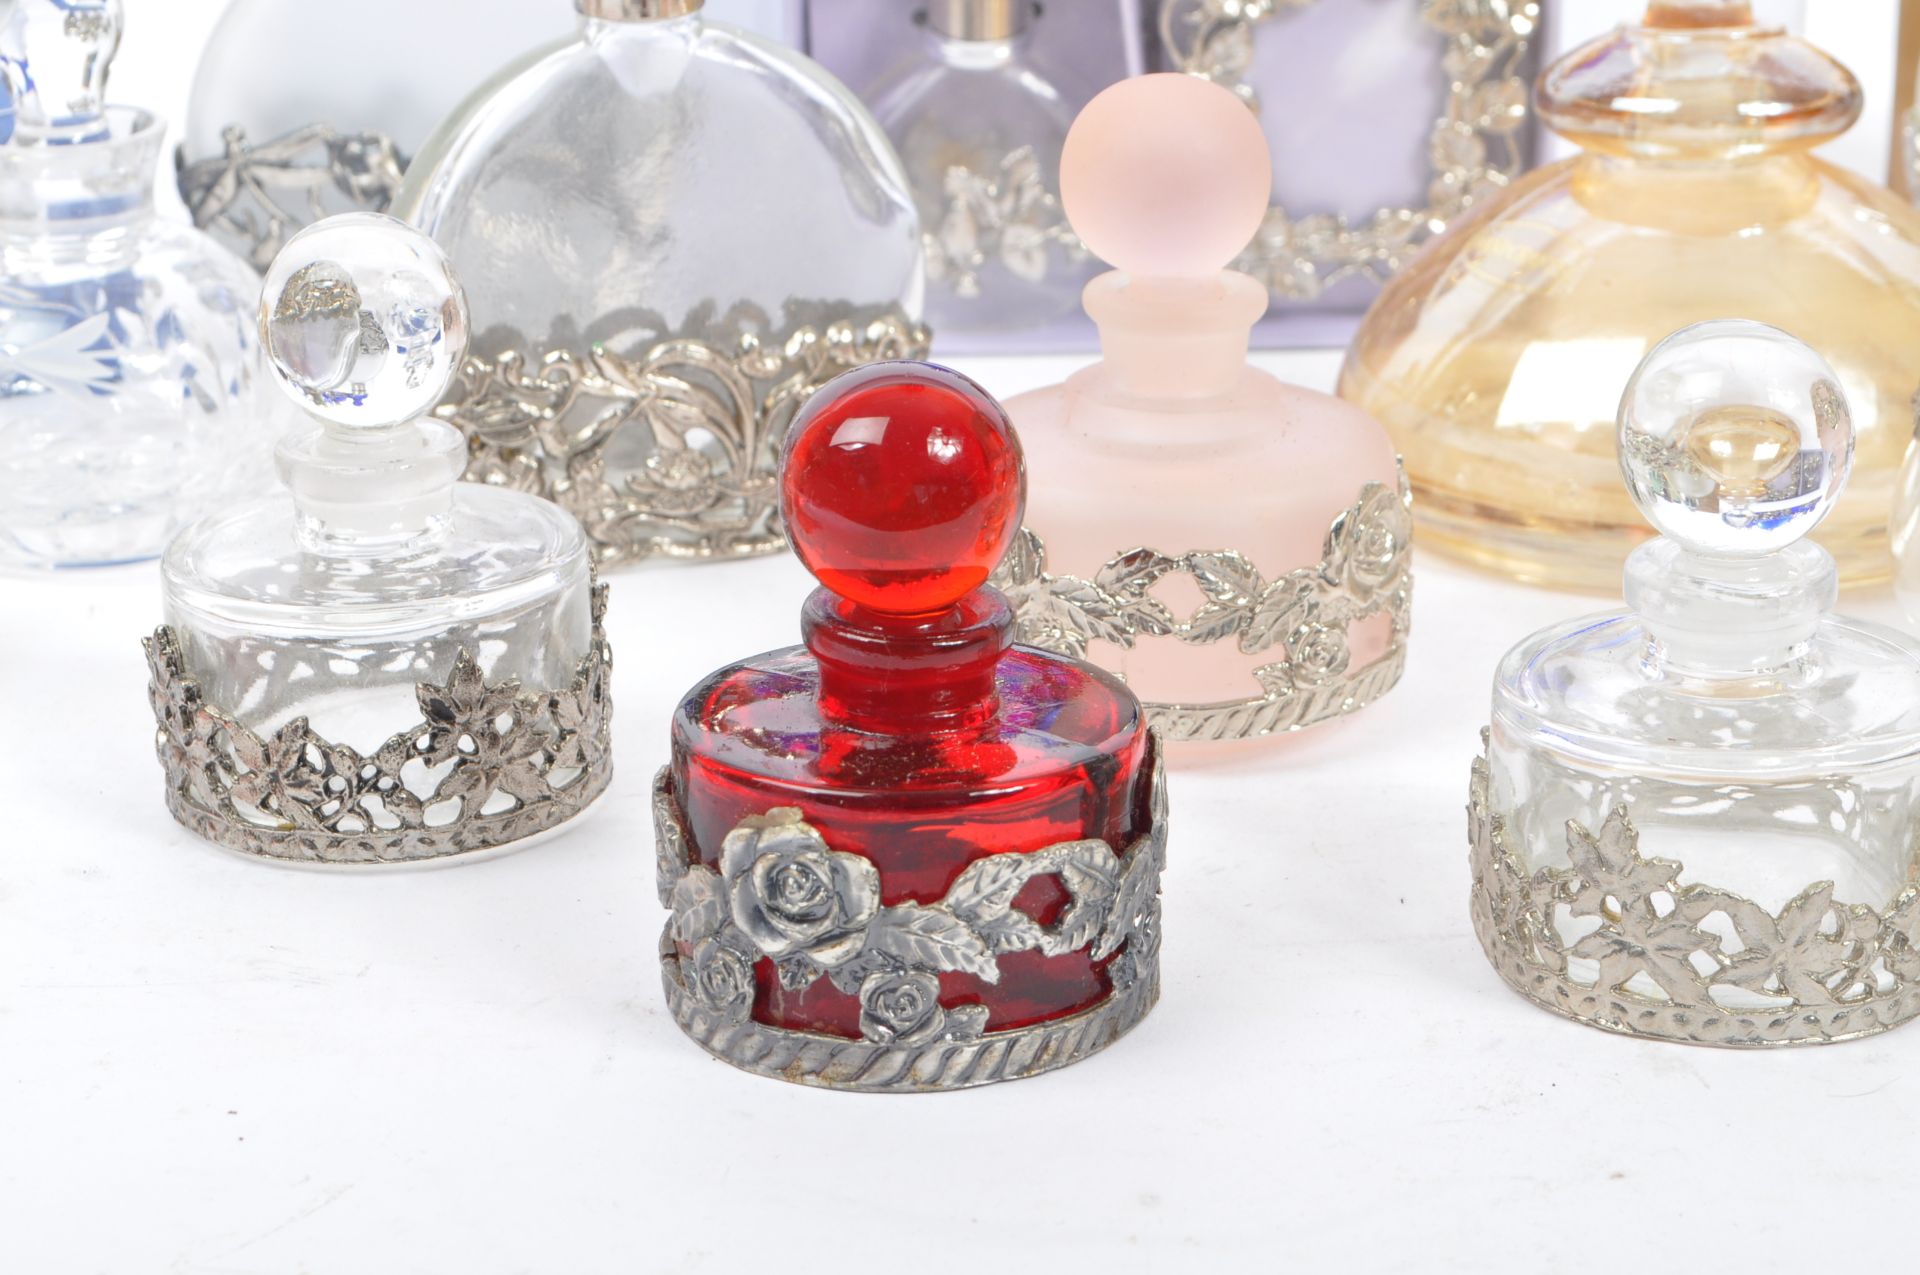 COLLECTION OF PERFUME FRAGRANCE BOTTLES - Image 3 of 10